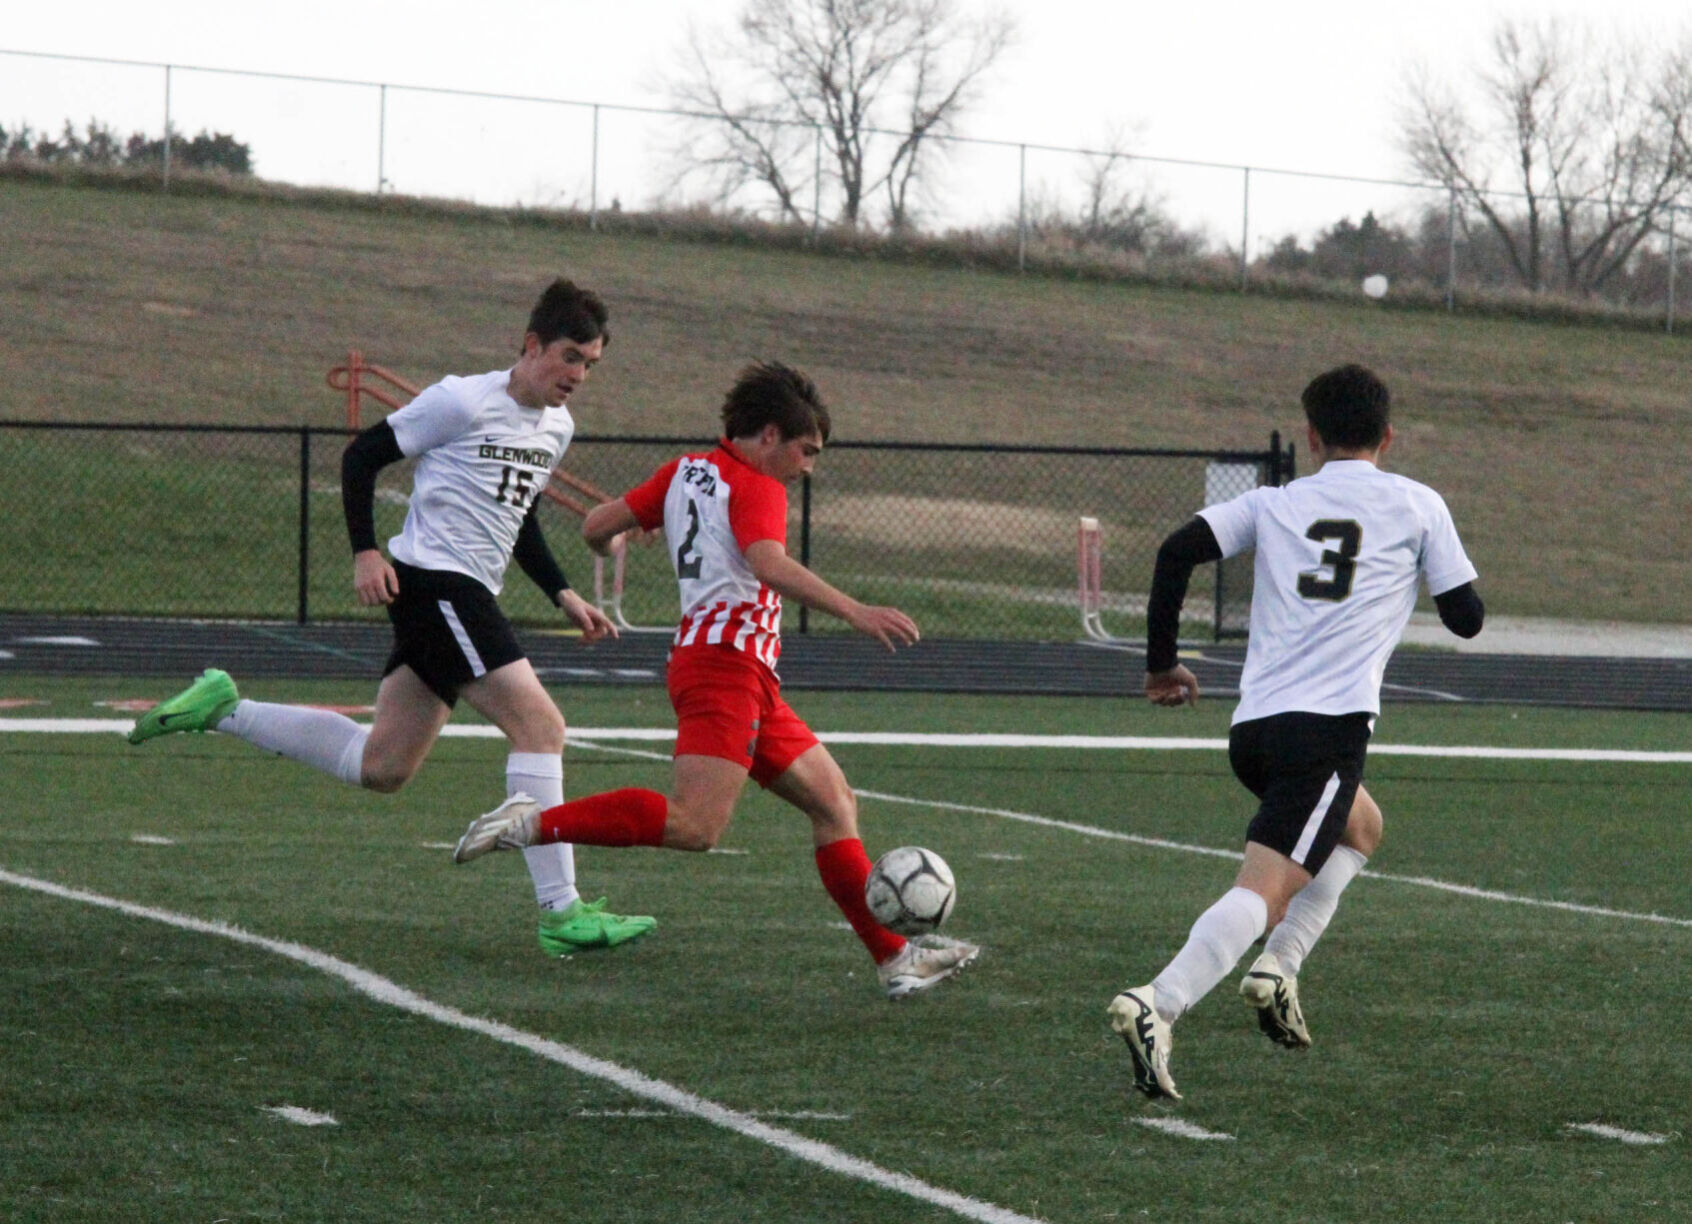 Treynor Cardinals seal historic win over Glenwood Rams with a 2-1 victory in soccer showdown